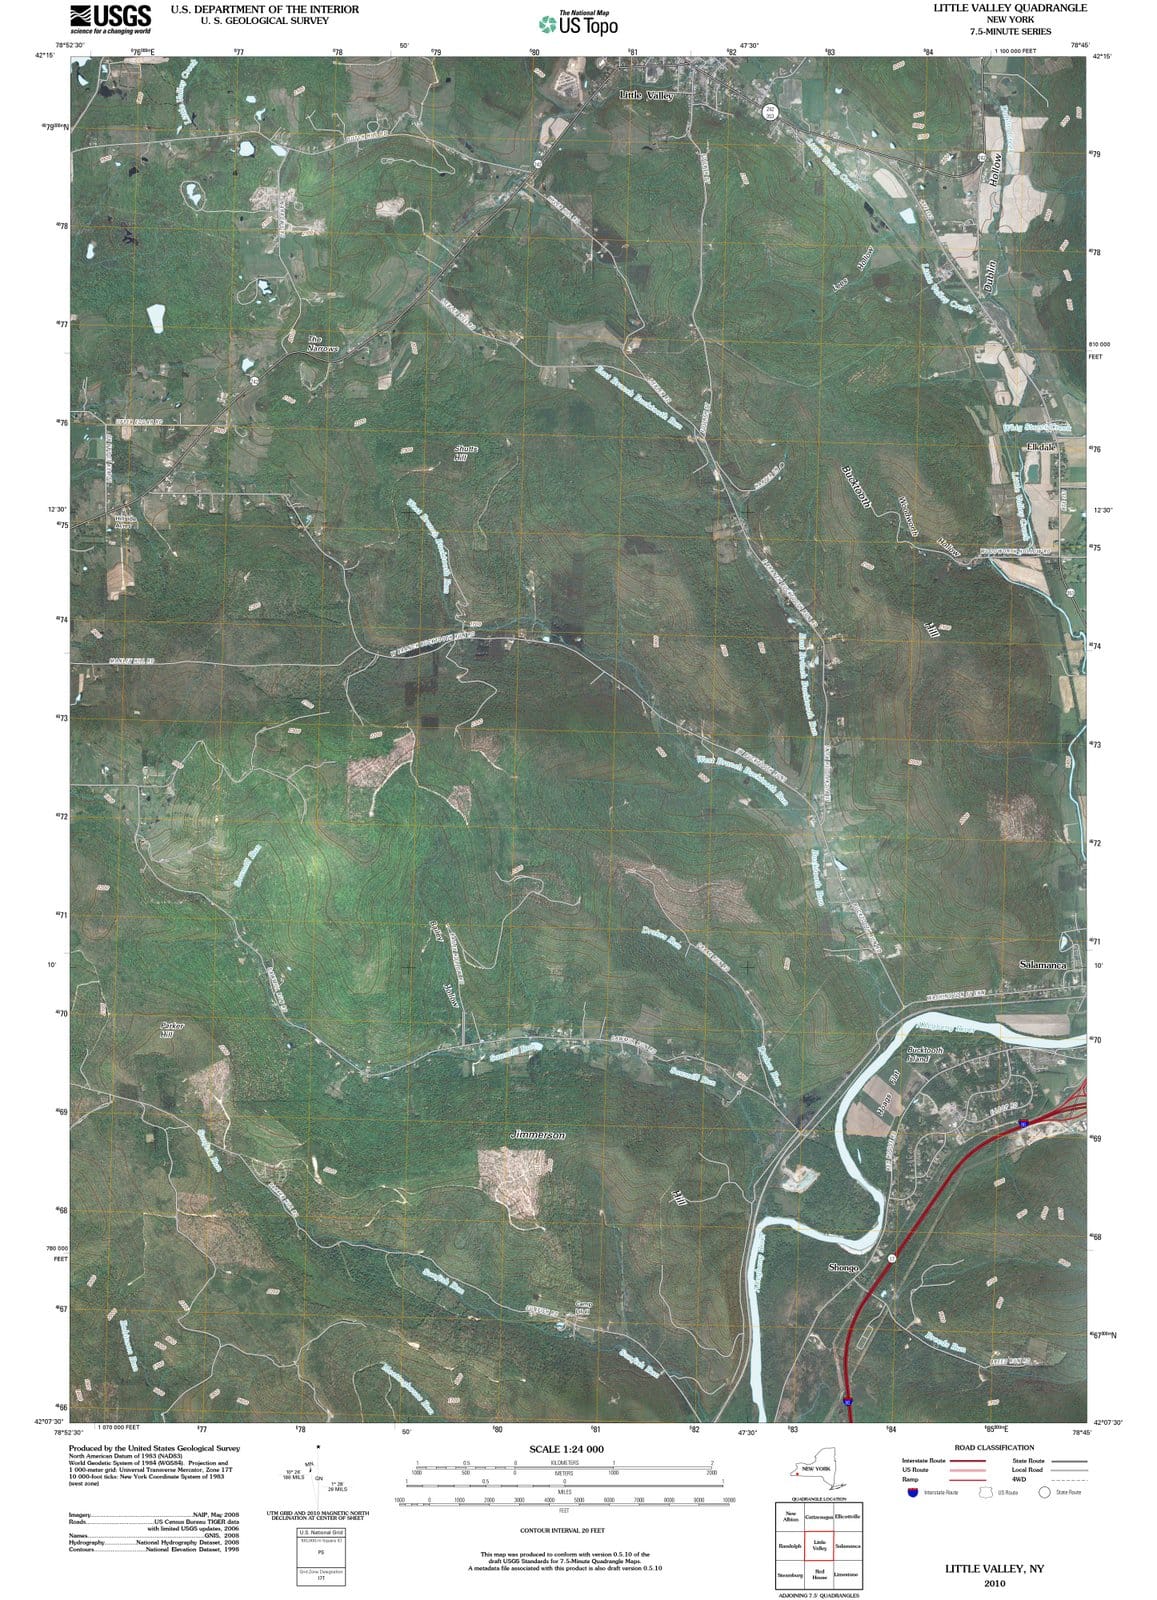 2010 Little Valley, NY - New York - USGS Topographic Map